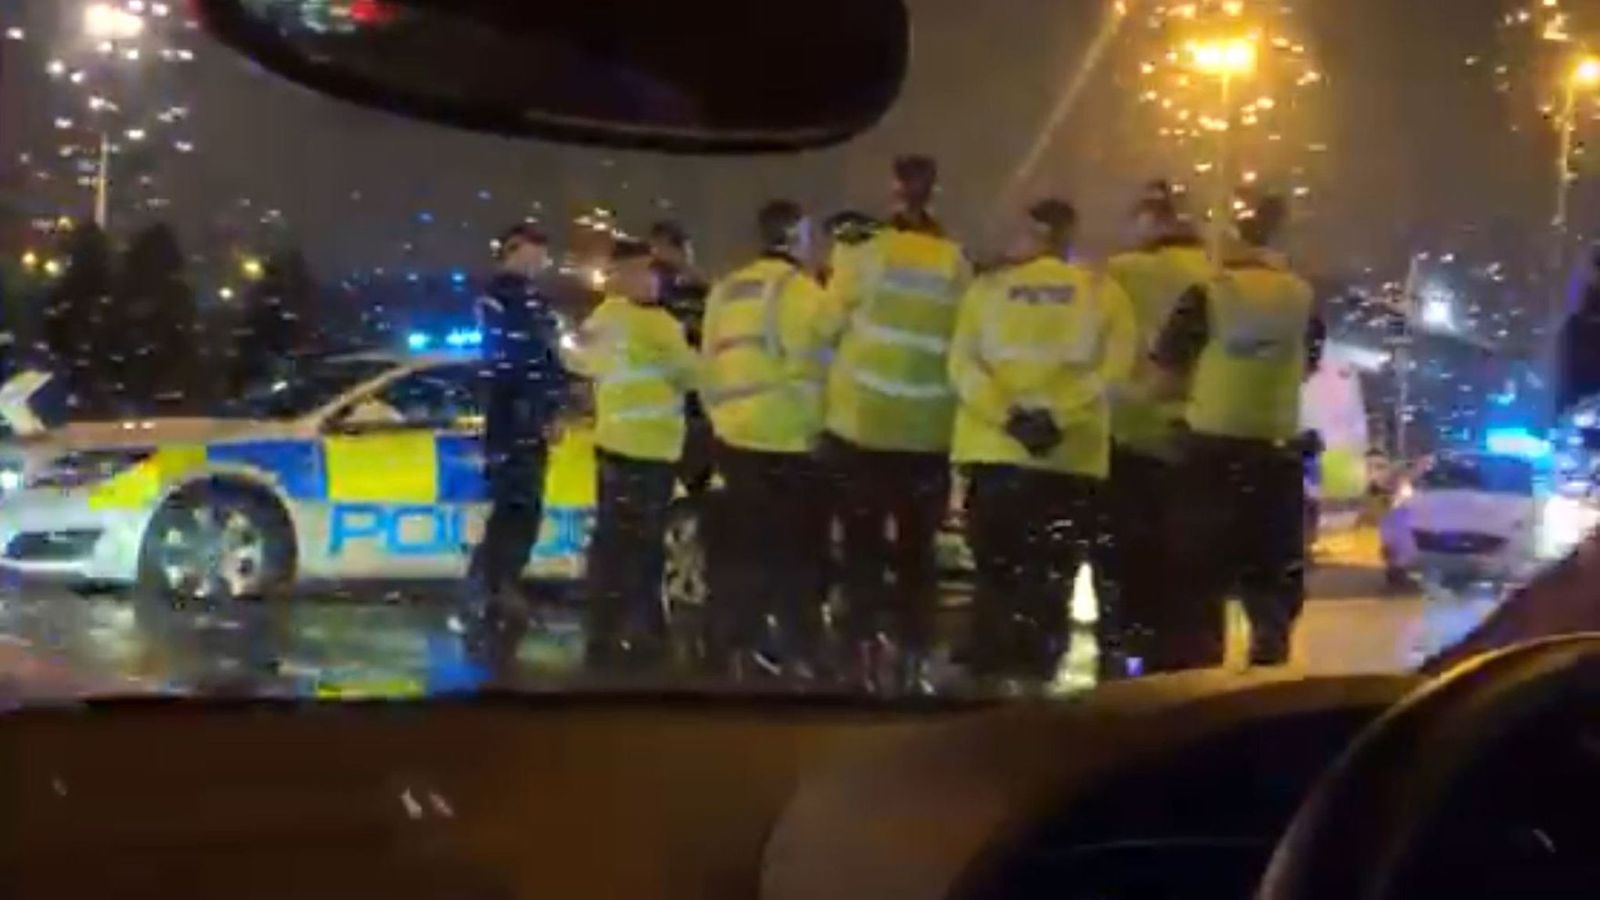 Several People Injured In Glasgow “Serious Incident”